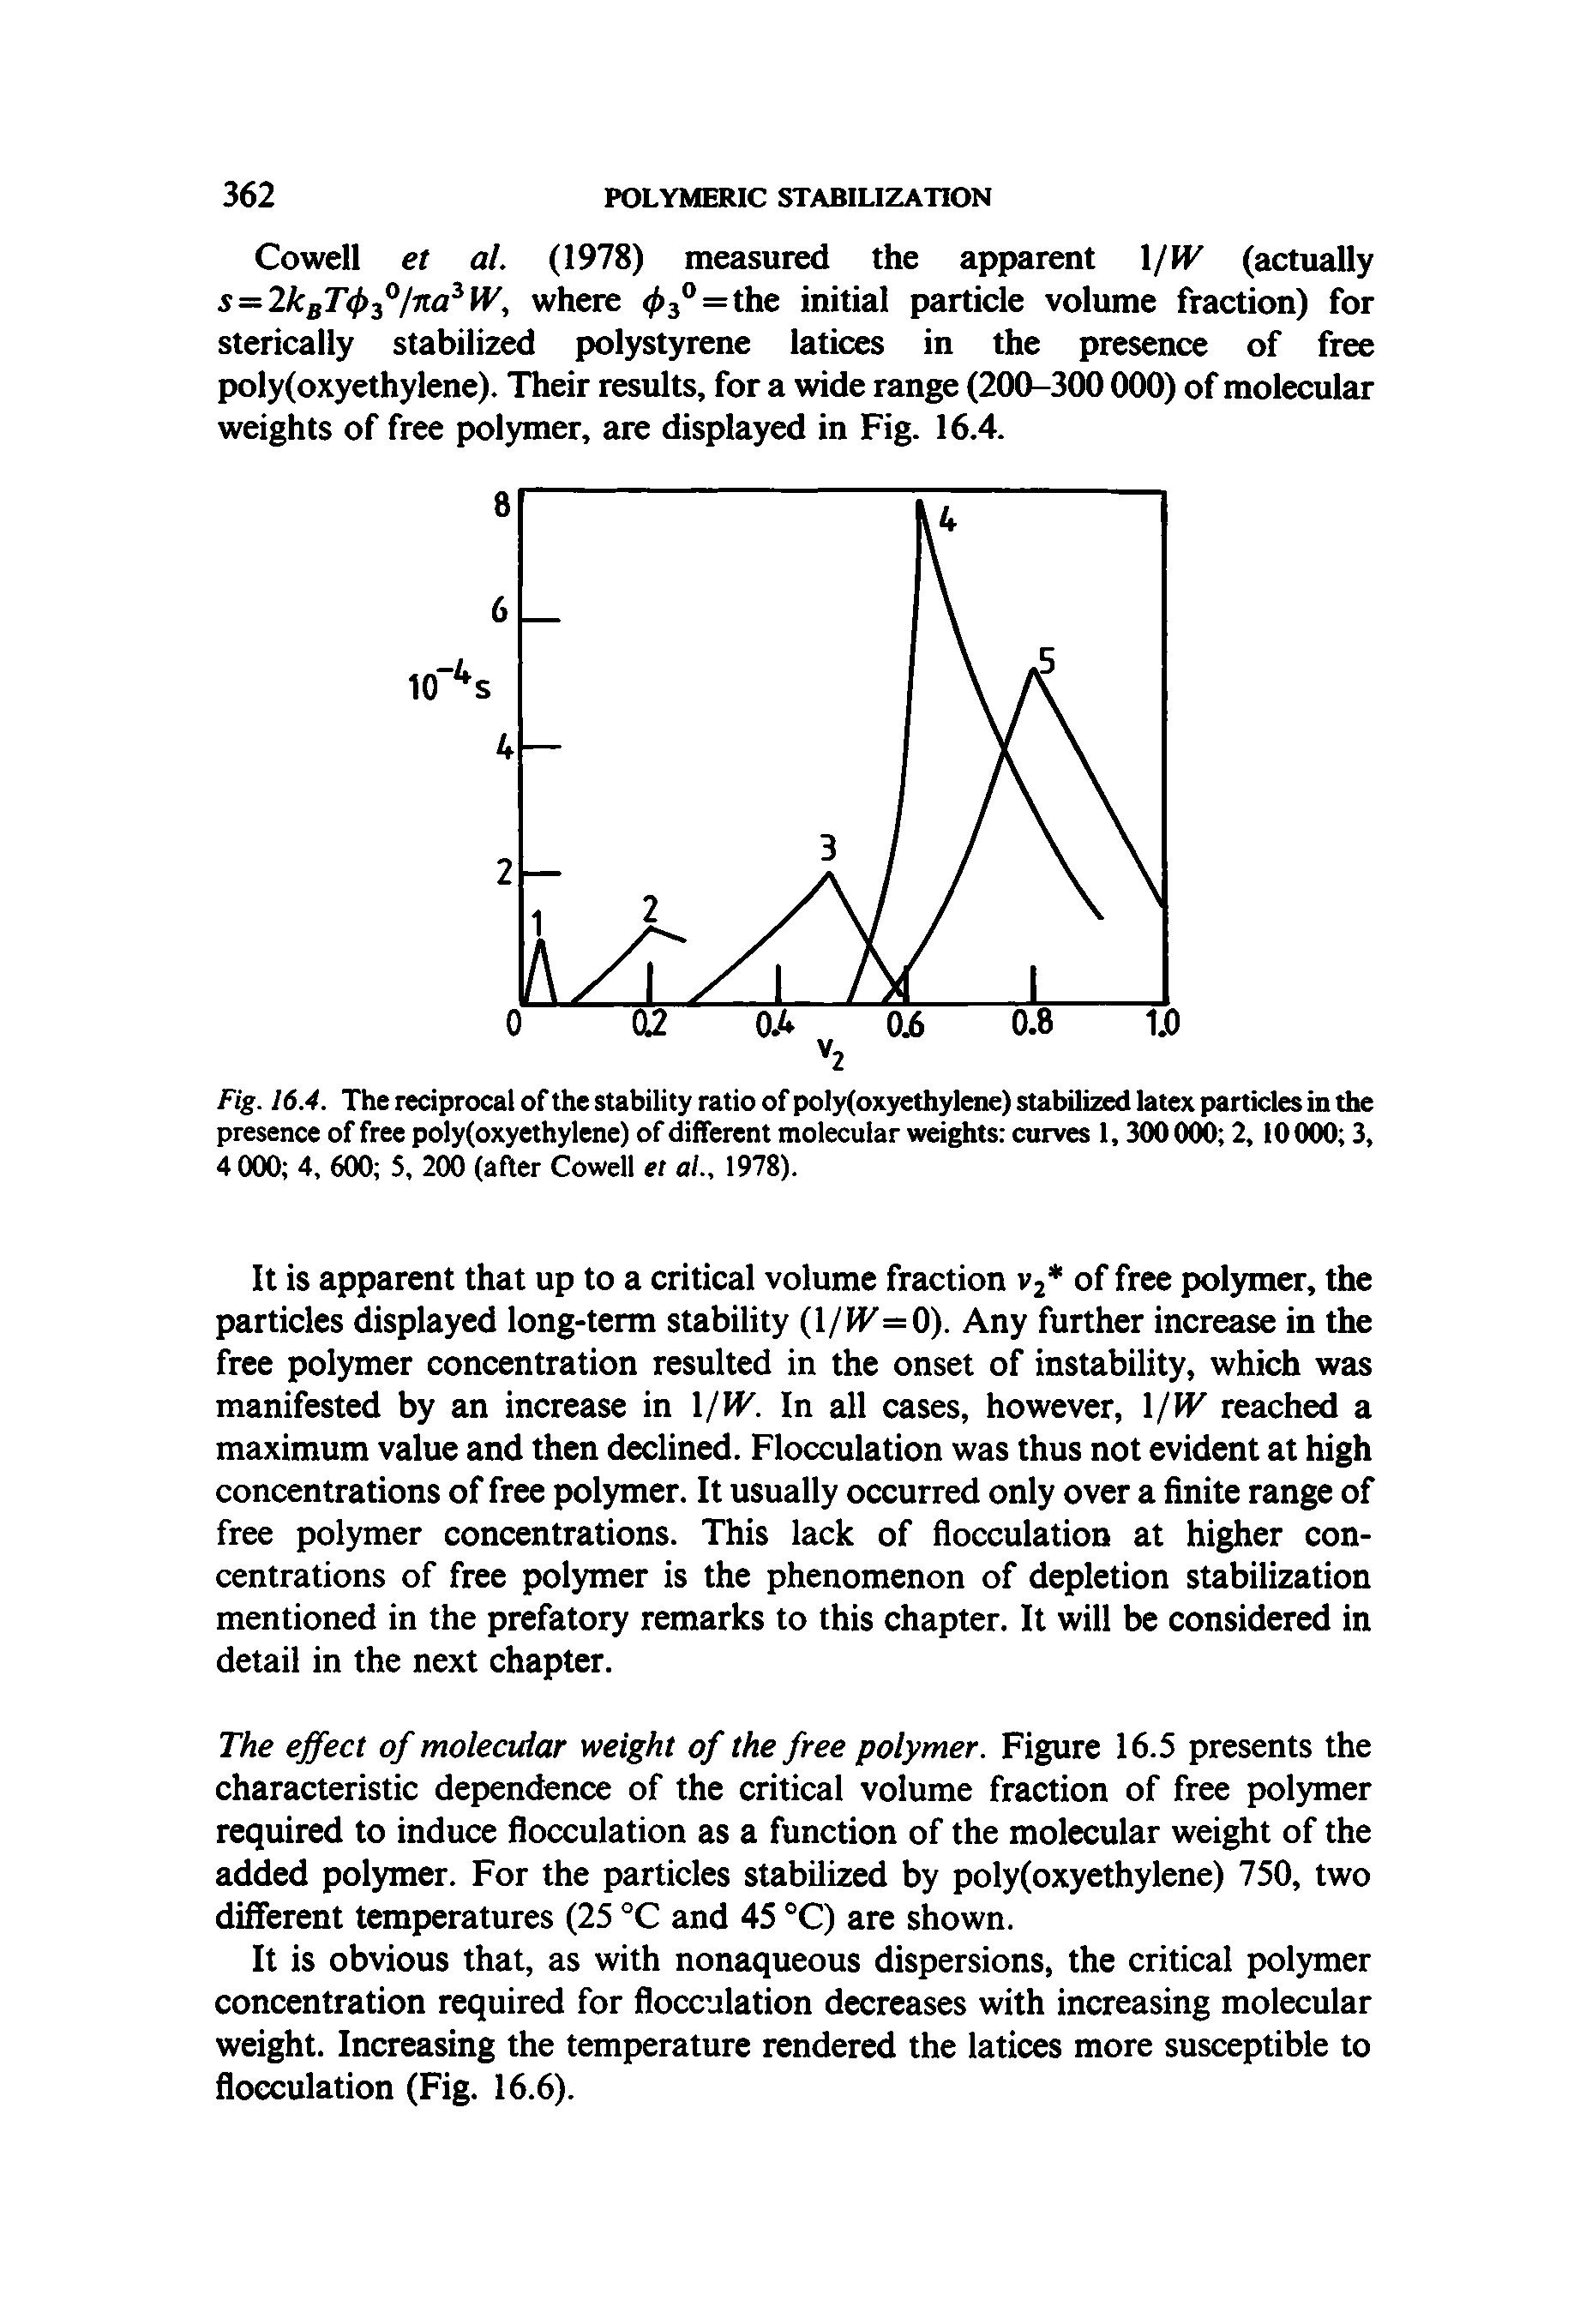 Fig. 16.4. The reciprocal of the stability ratio of poly(oxyethylene) stabilized latex particles in the presence of free poly(oxyethylene) of different molecular weights curves 1,300000 2,10000 3, 4 000 4, 600 5, 200 (after Cowell et al., 1978).